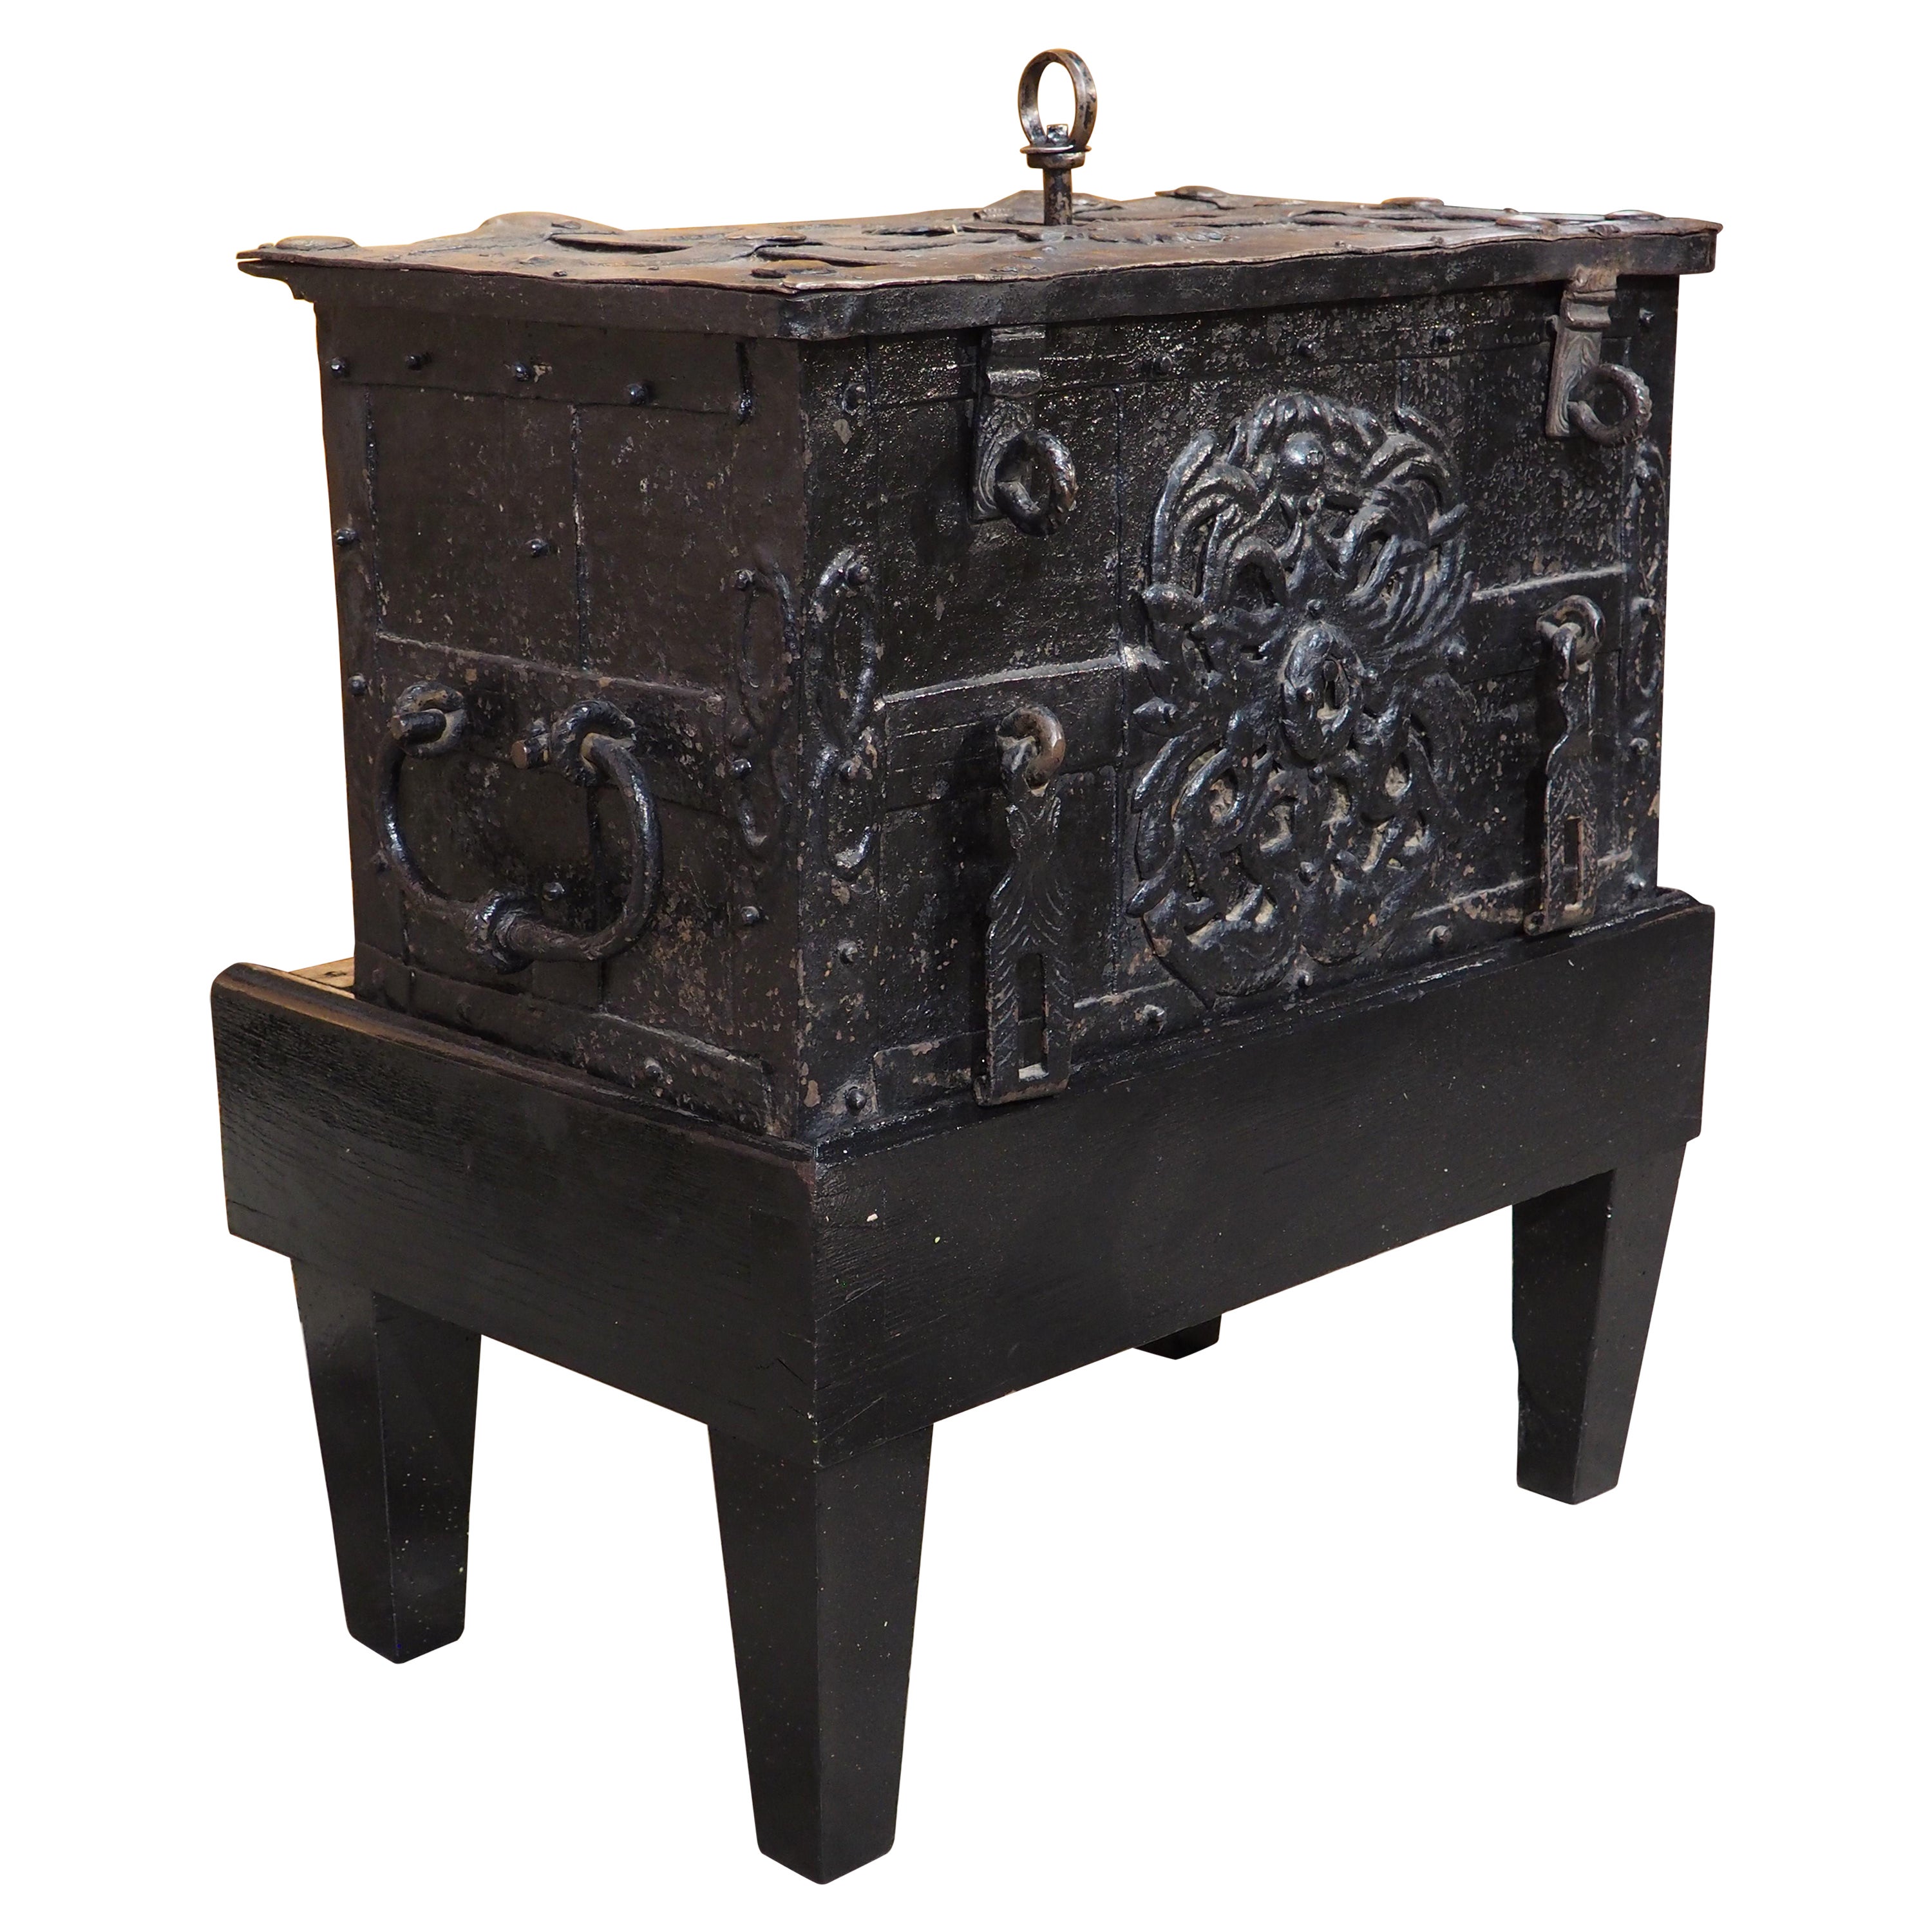 Circa 1650 Sheet Iron Money Chest from Southern Germany with Wooden Stand